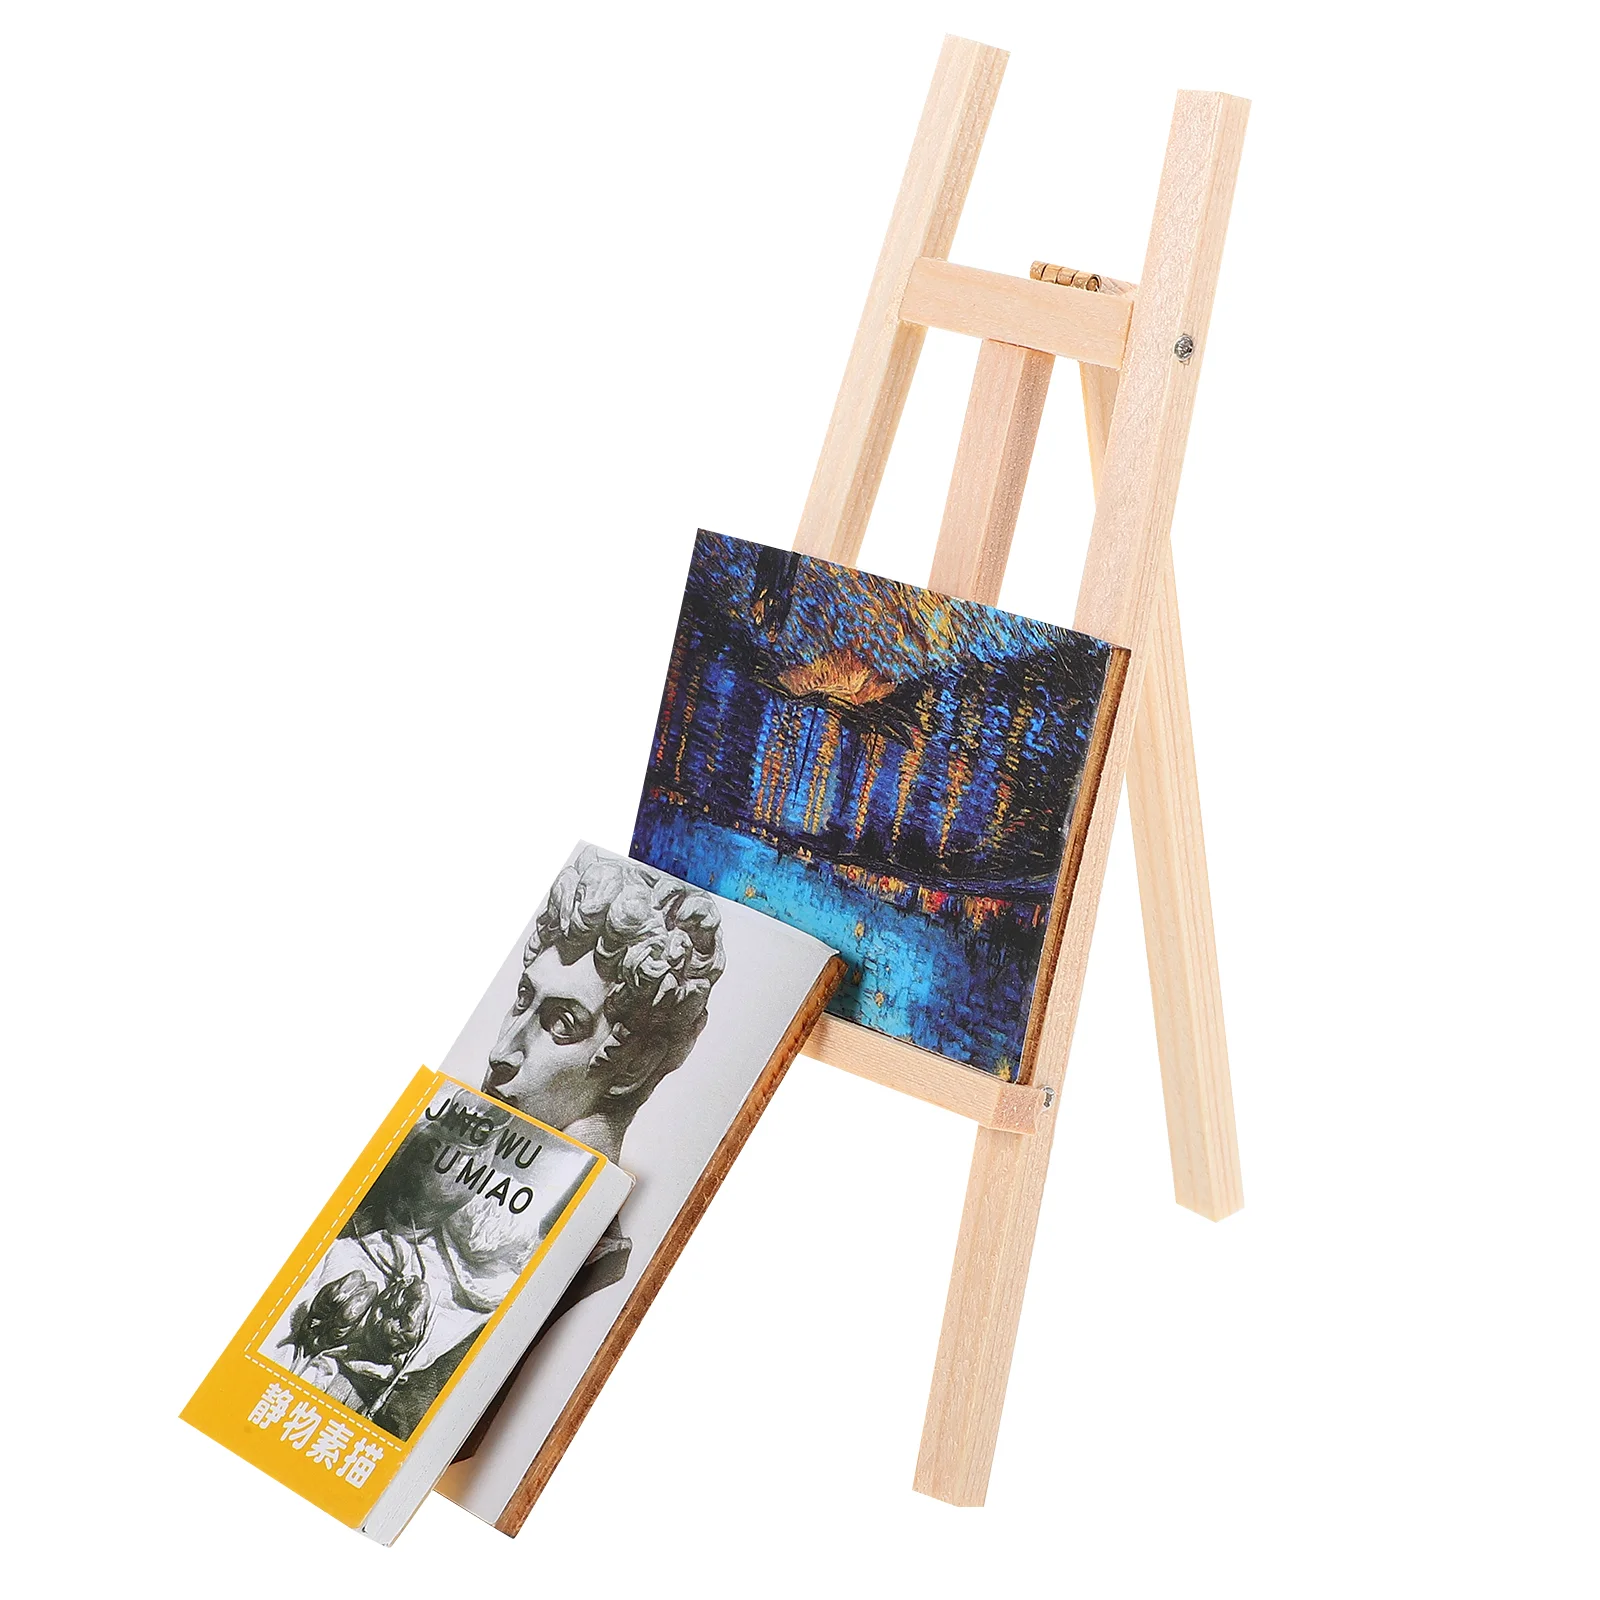 House Decorative Painting Mini Adornment Miniature Easel Wooden Board Furniture Small Model 45pcs mini easel stands 3 inch plastic plate stand holder display picture easel stand for display picture frame